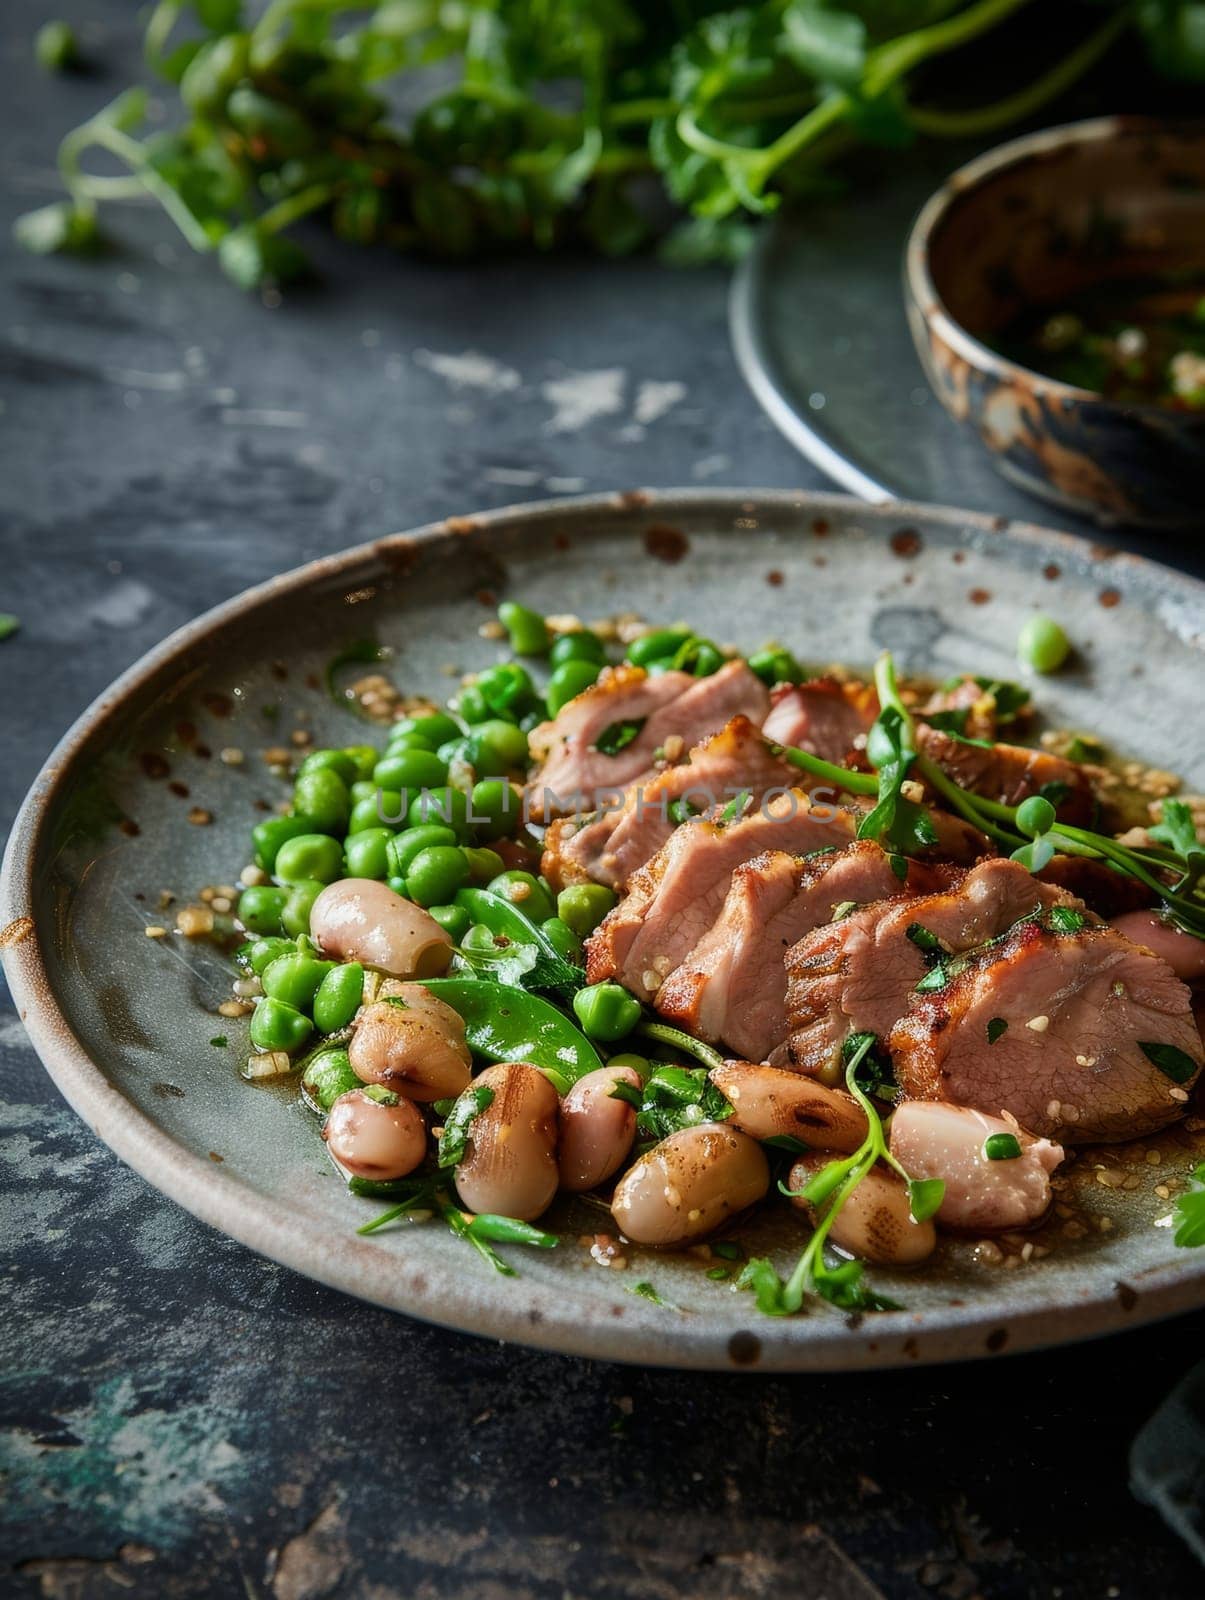 Traditional Luxembourgish dish of judd mat gaardebounen, featuring smoked pork collar with fresh broad beans, served on a simple ceramic plate. This hearty, authentic meal represents the comfort food. by sfinks